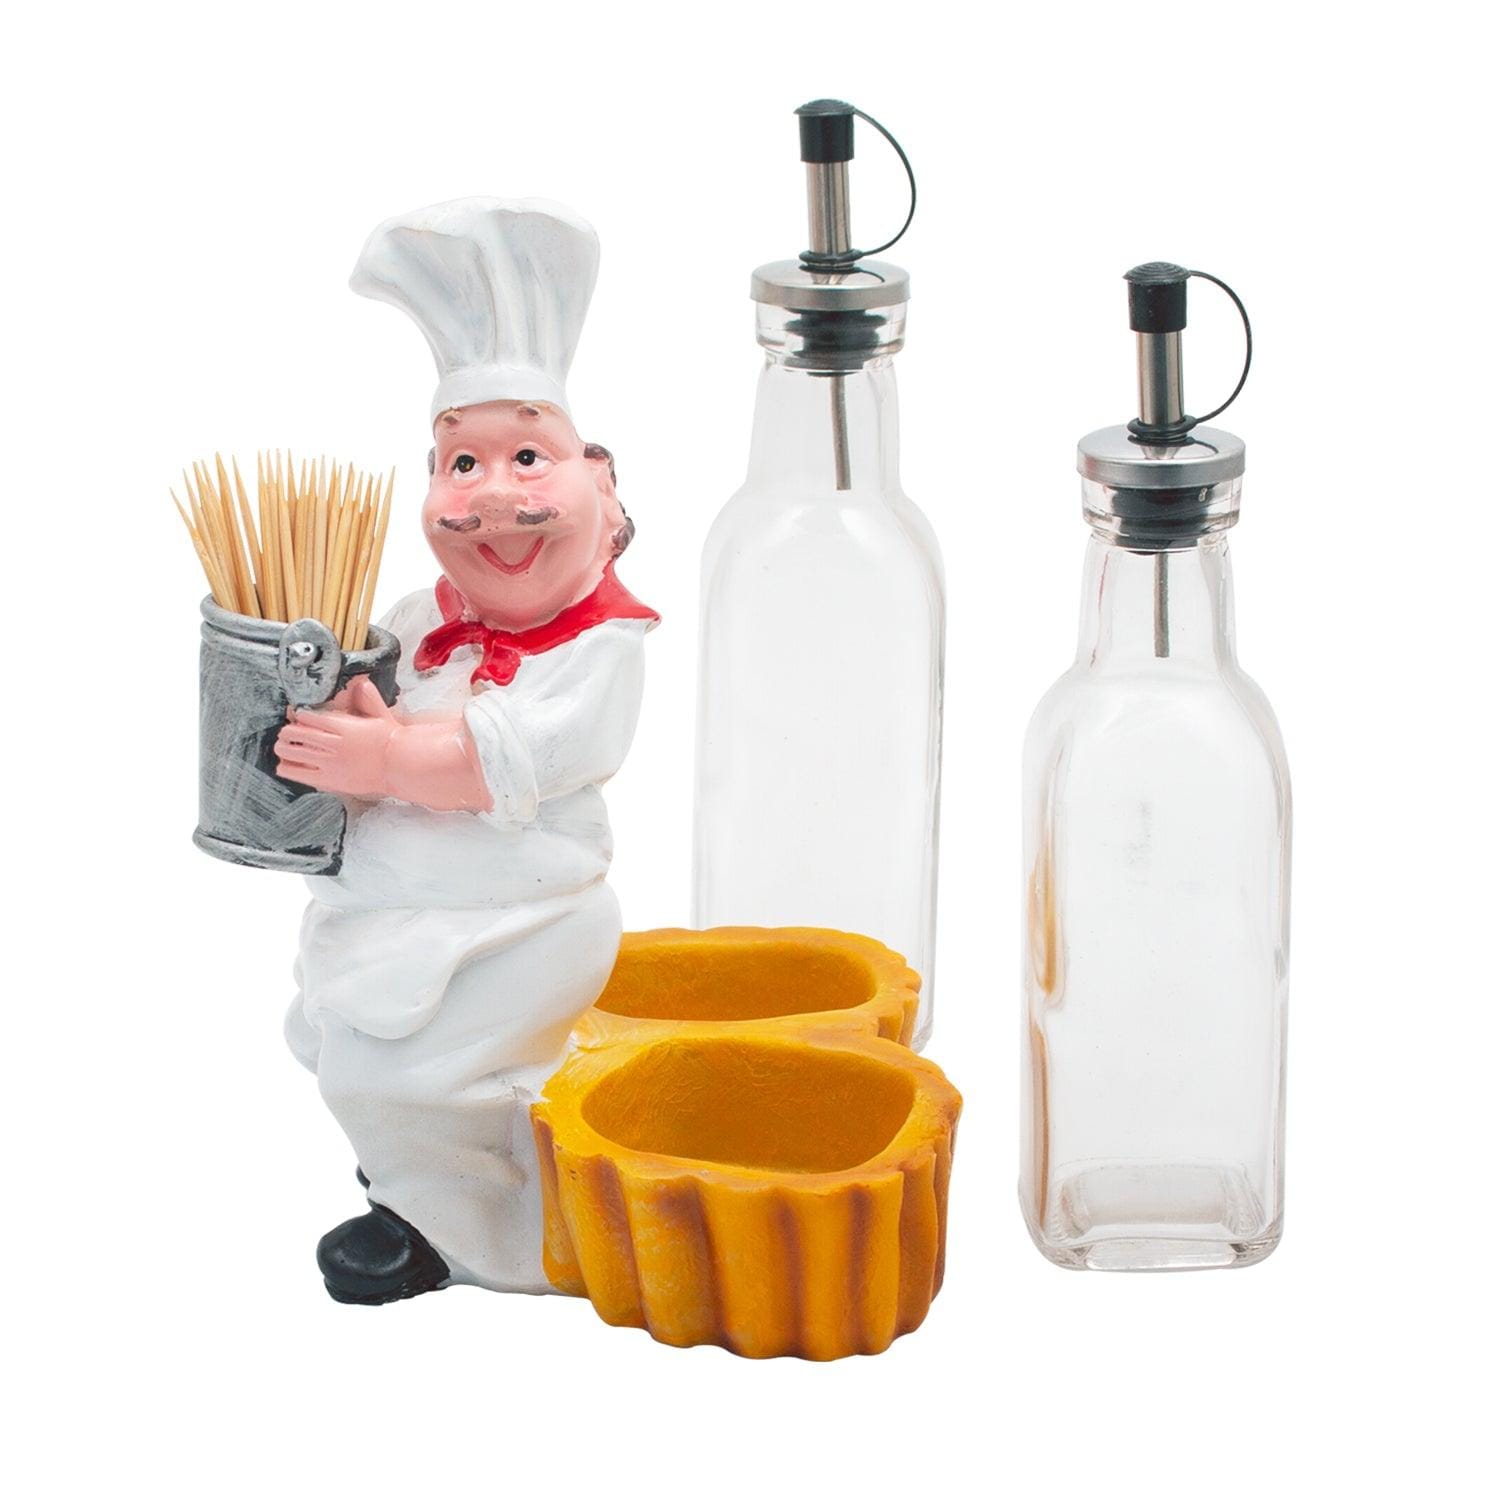 Foodie Chef Figurine Resin Oil & Vinegar Bottles with Toothpick Holder Set (Right)